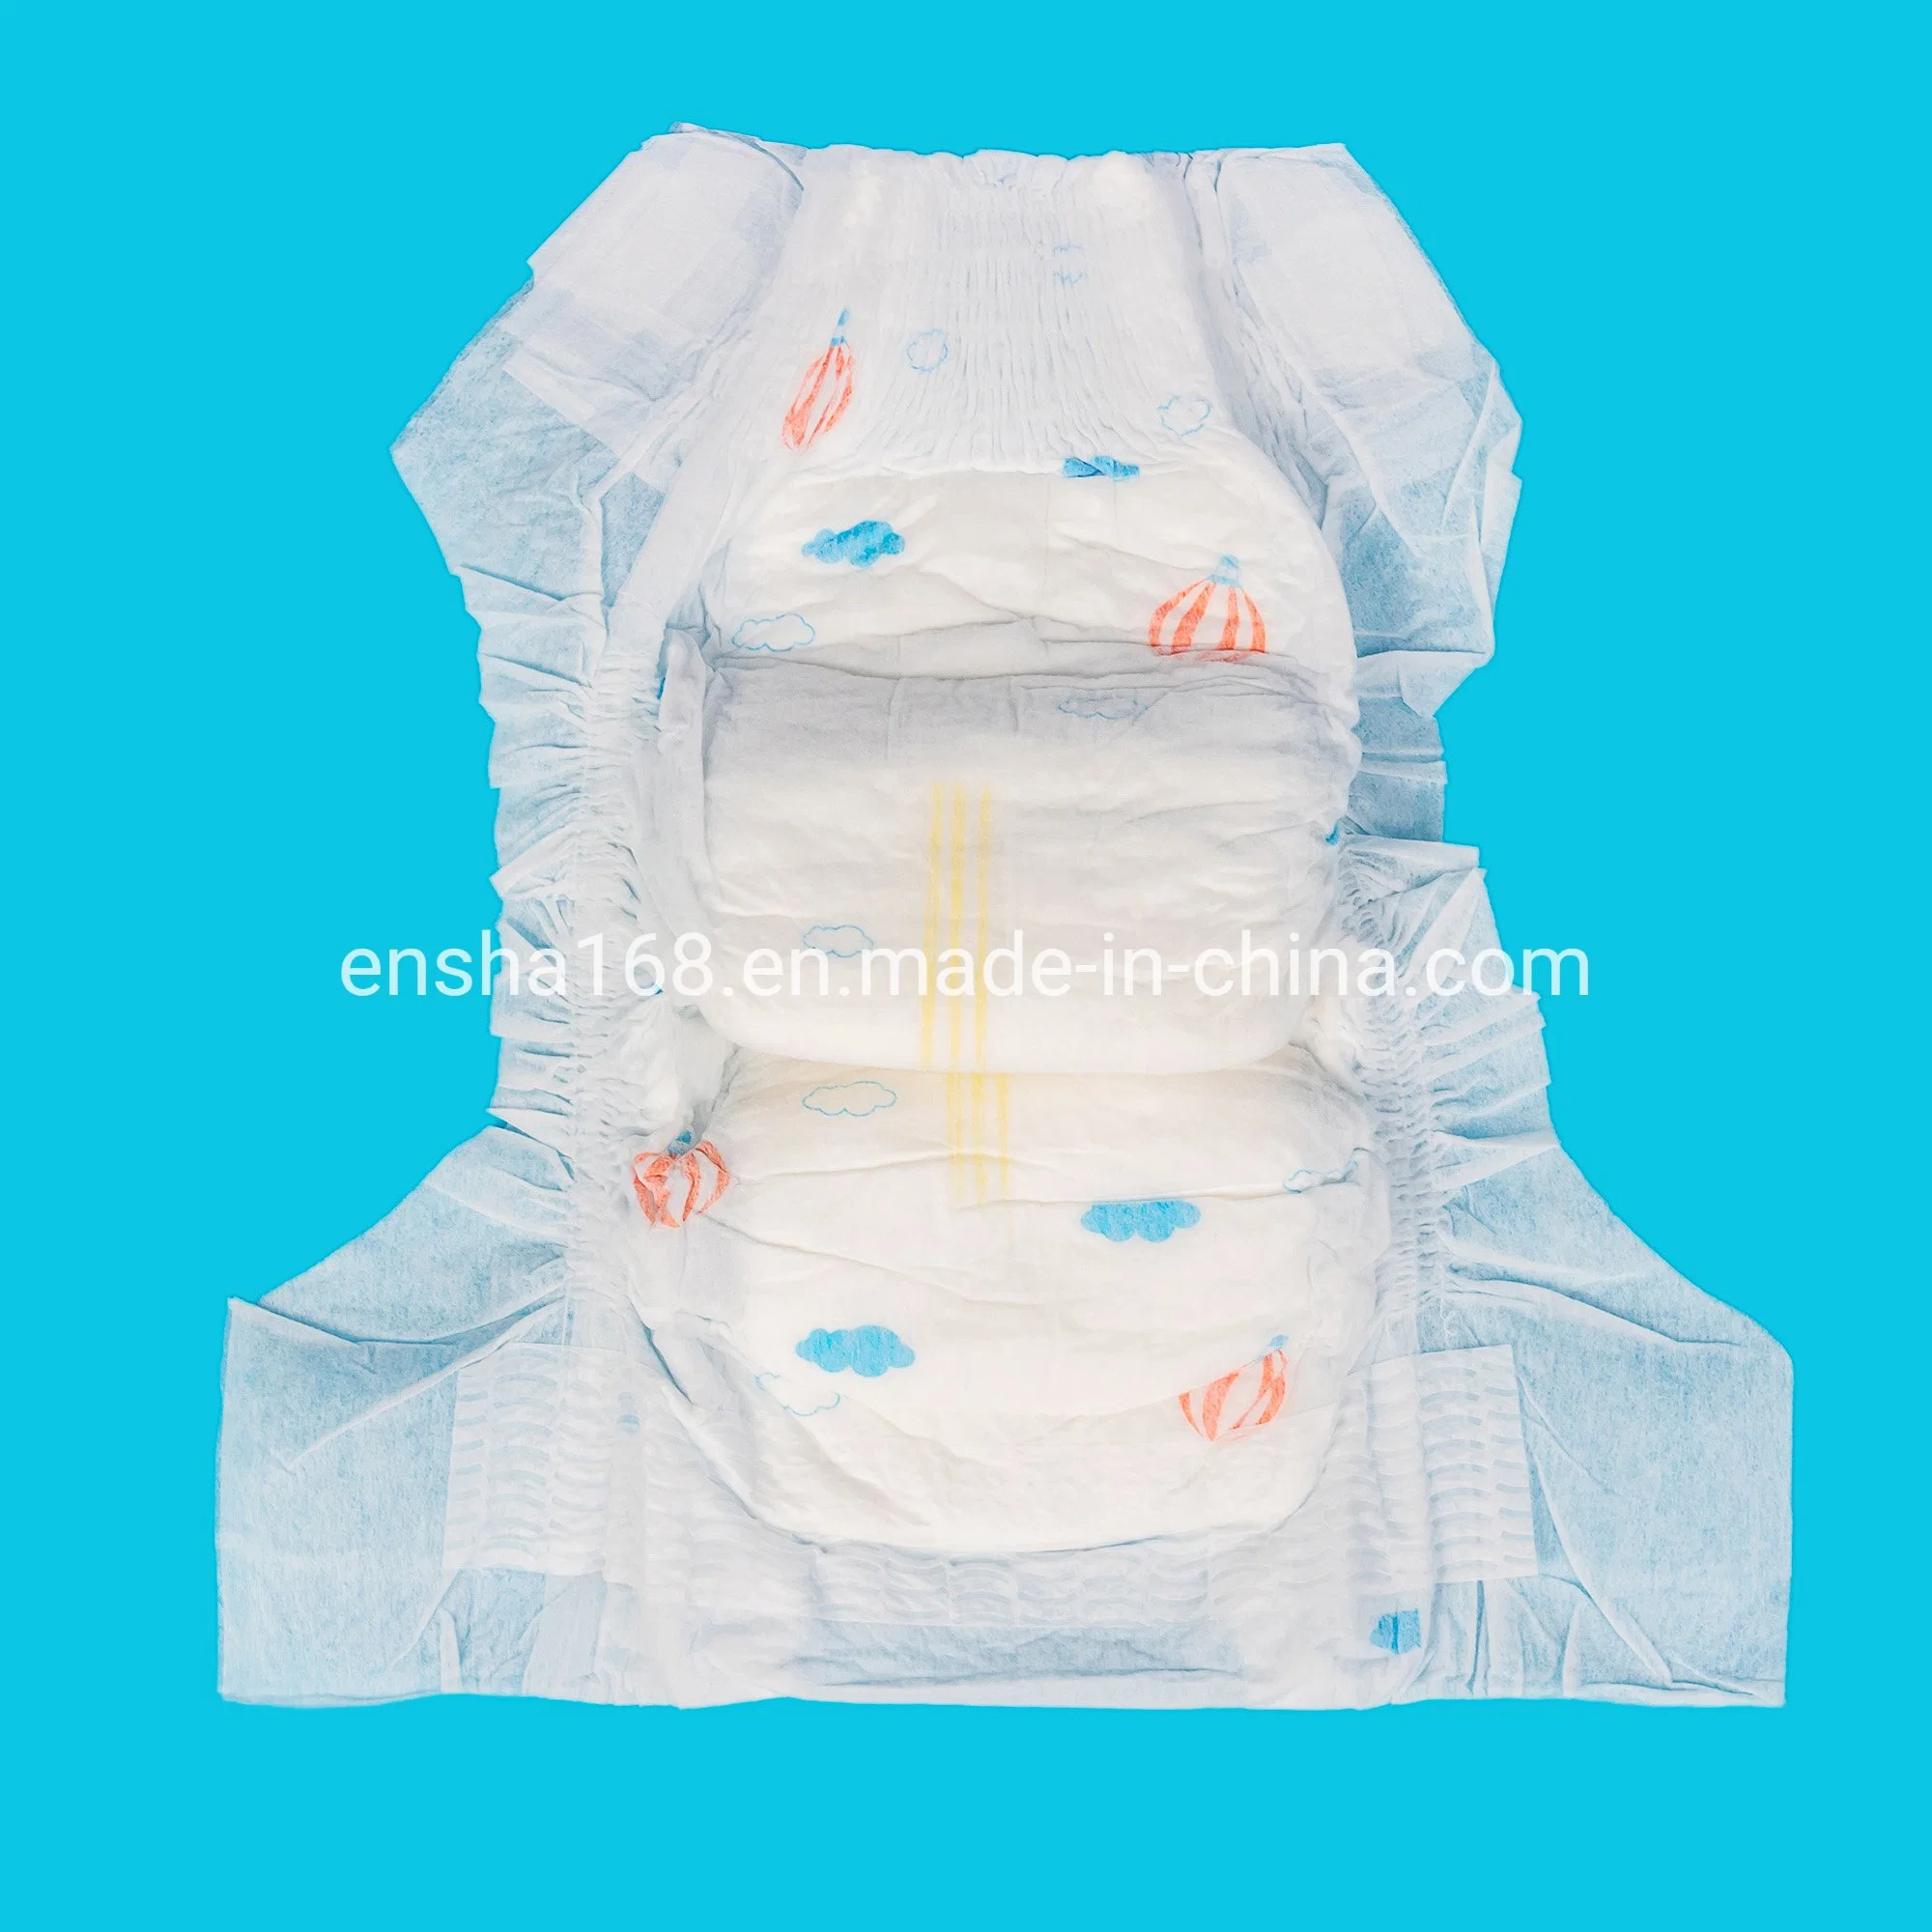 Disposable Baby Care Personal Care Products Baby Diapers